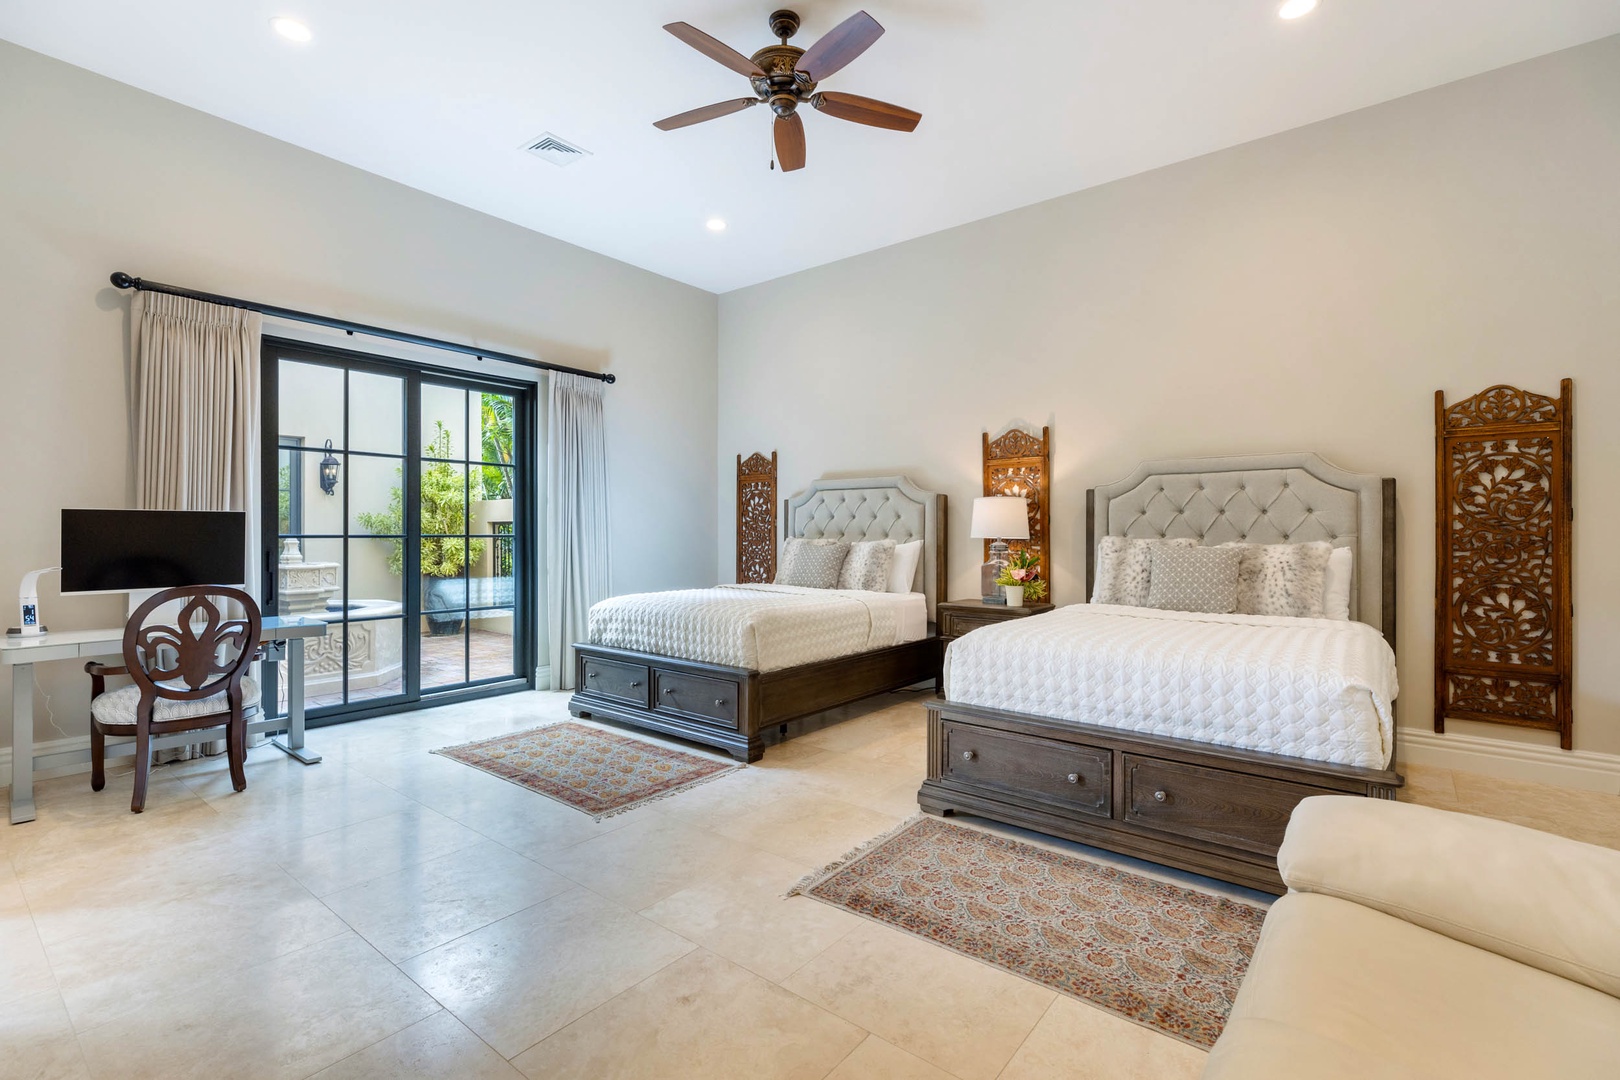 Honolulu Vacation Rentals, The Kahala Mansion - Luxury guest bedroom  with two queen beds.